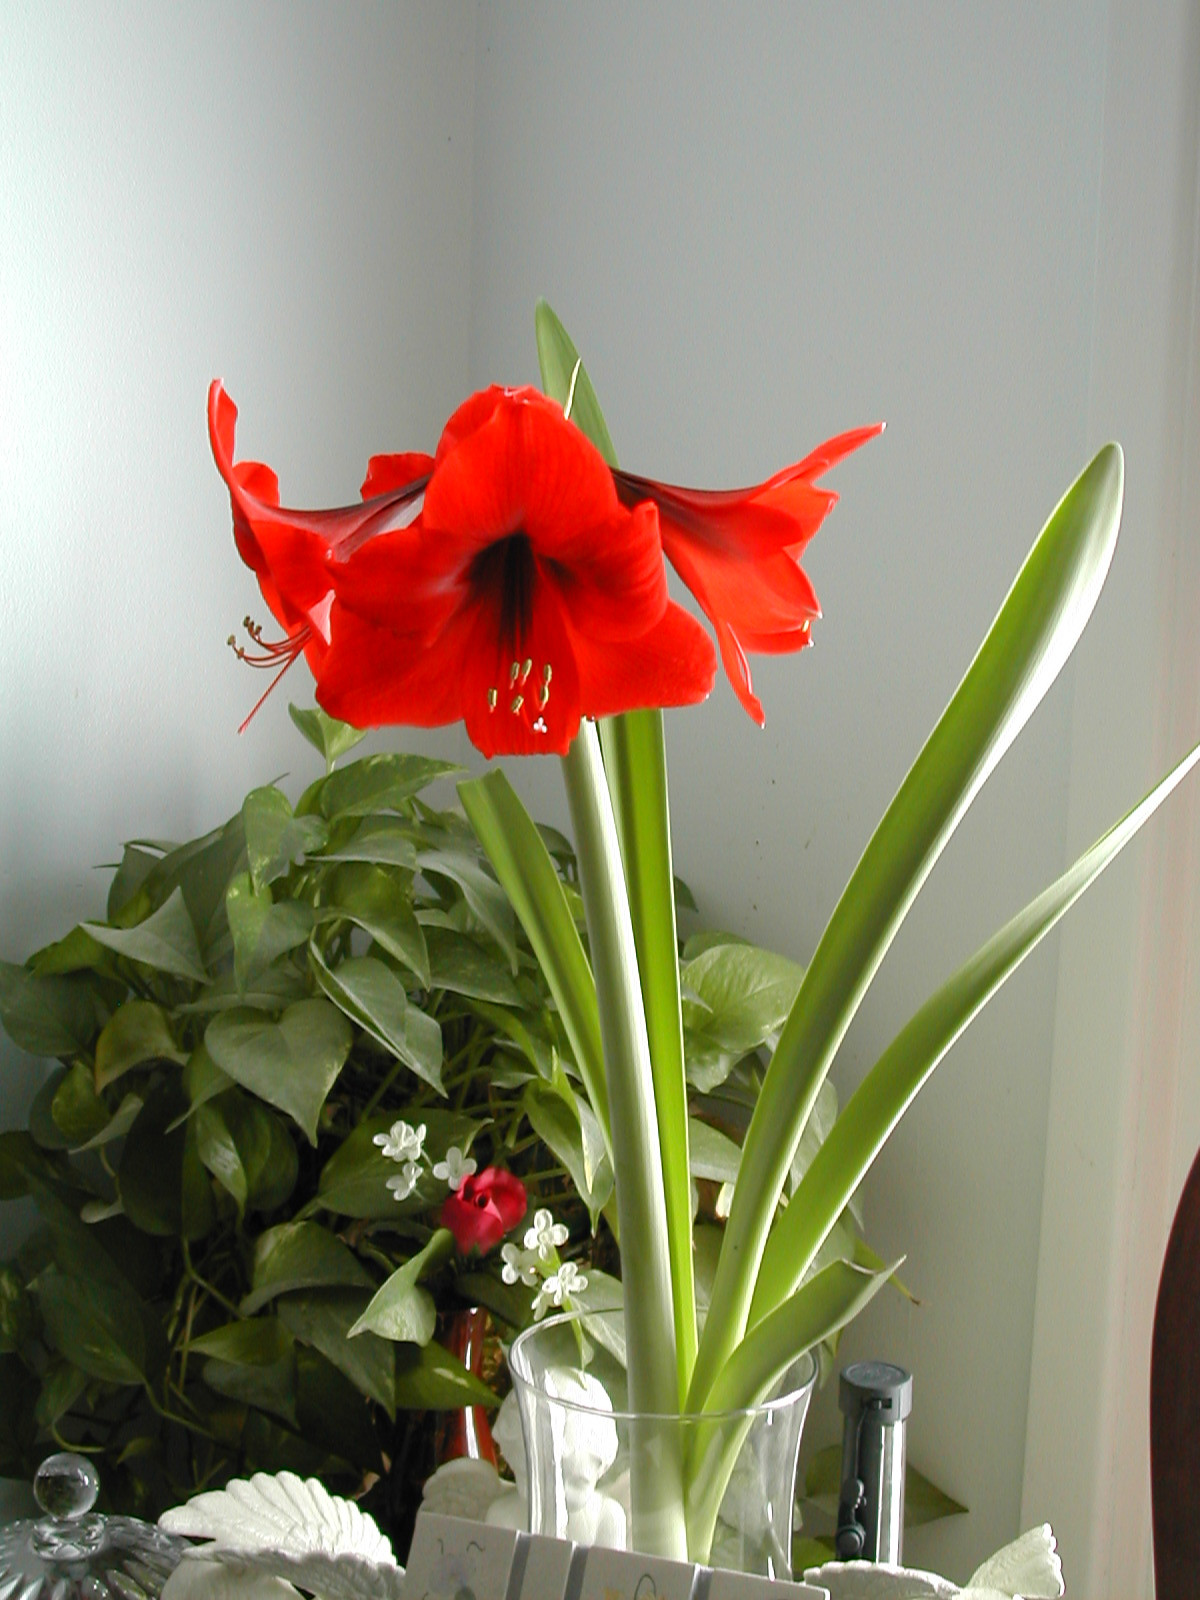 Christmas Flower Amaryllis
 The Other Red Christmas Flower Amaryllis Planting and